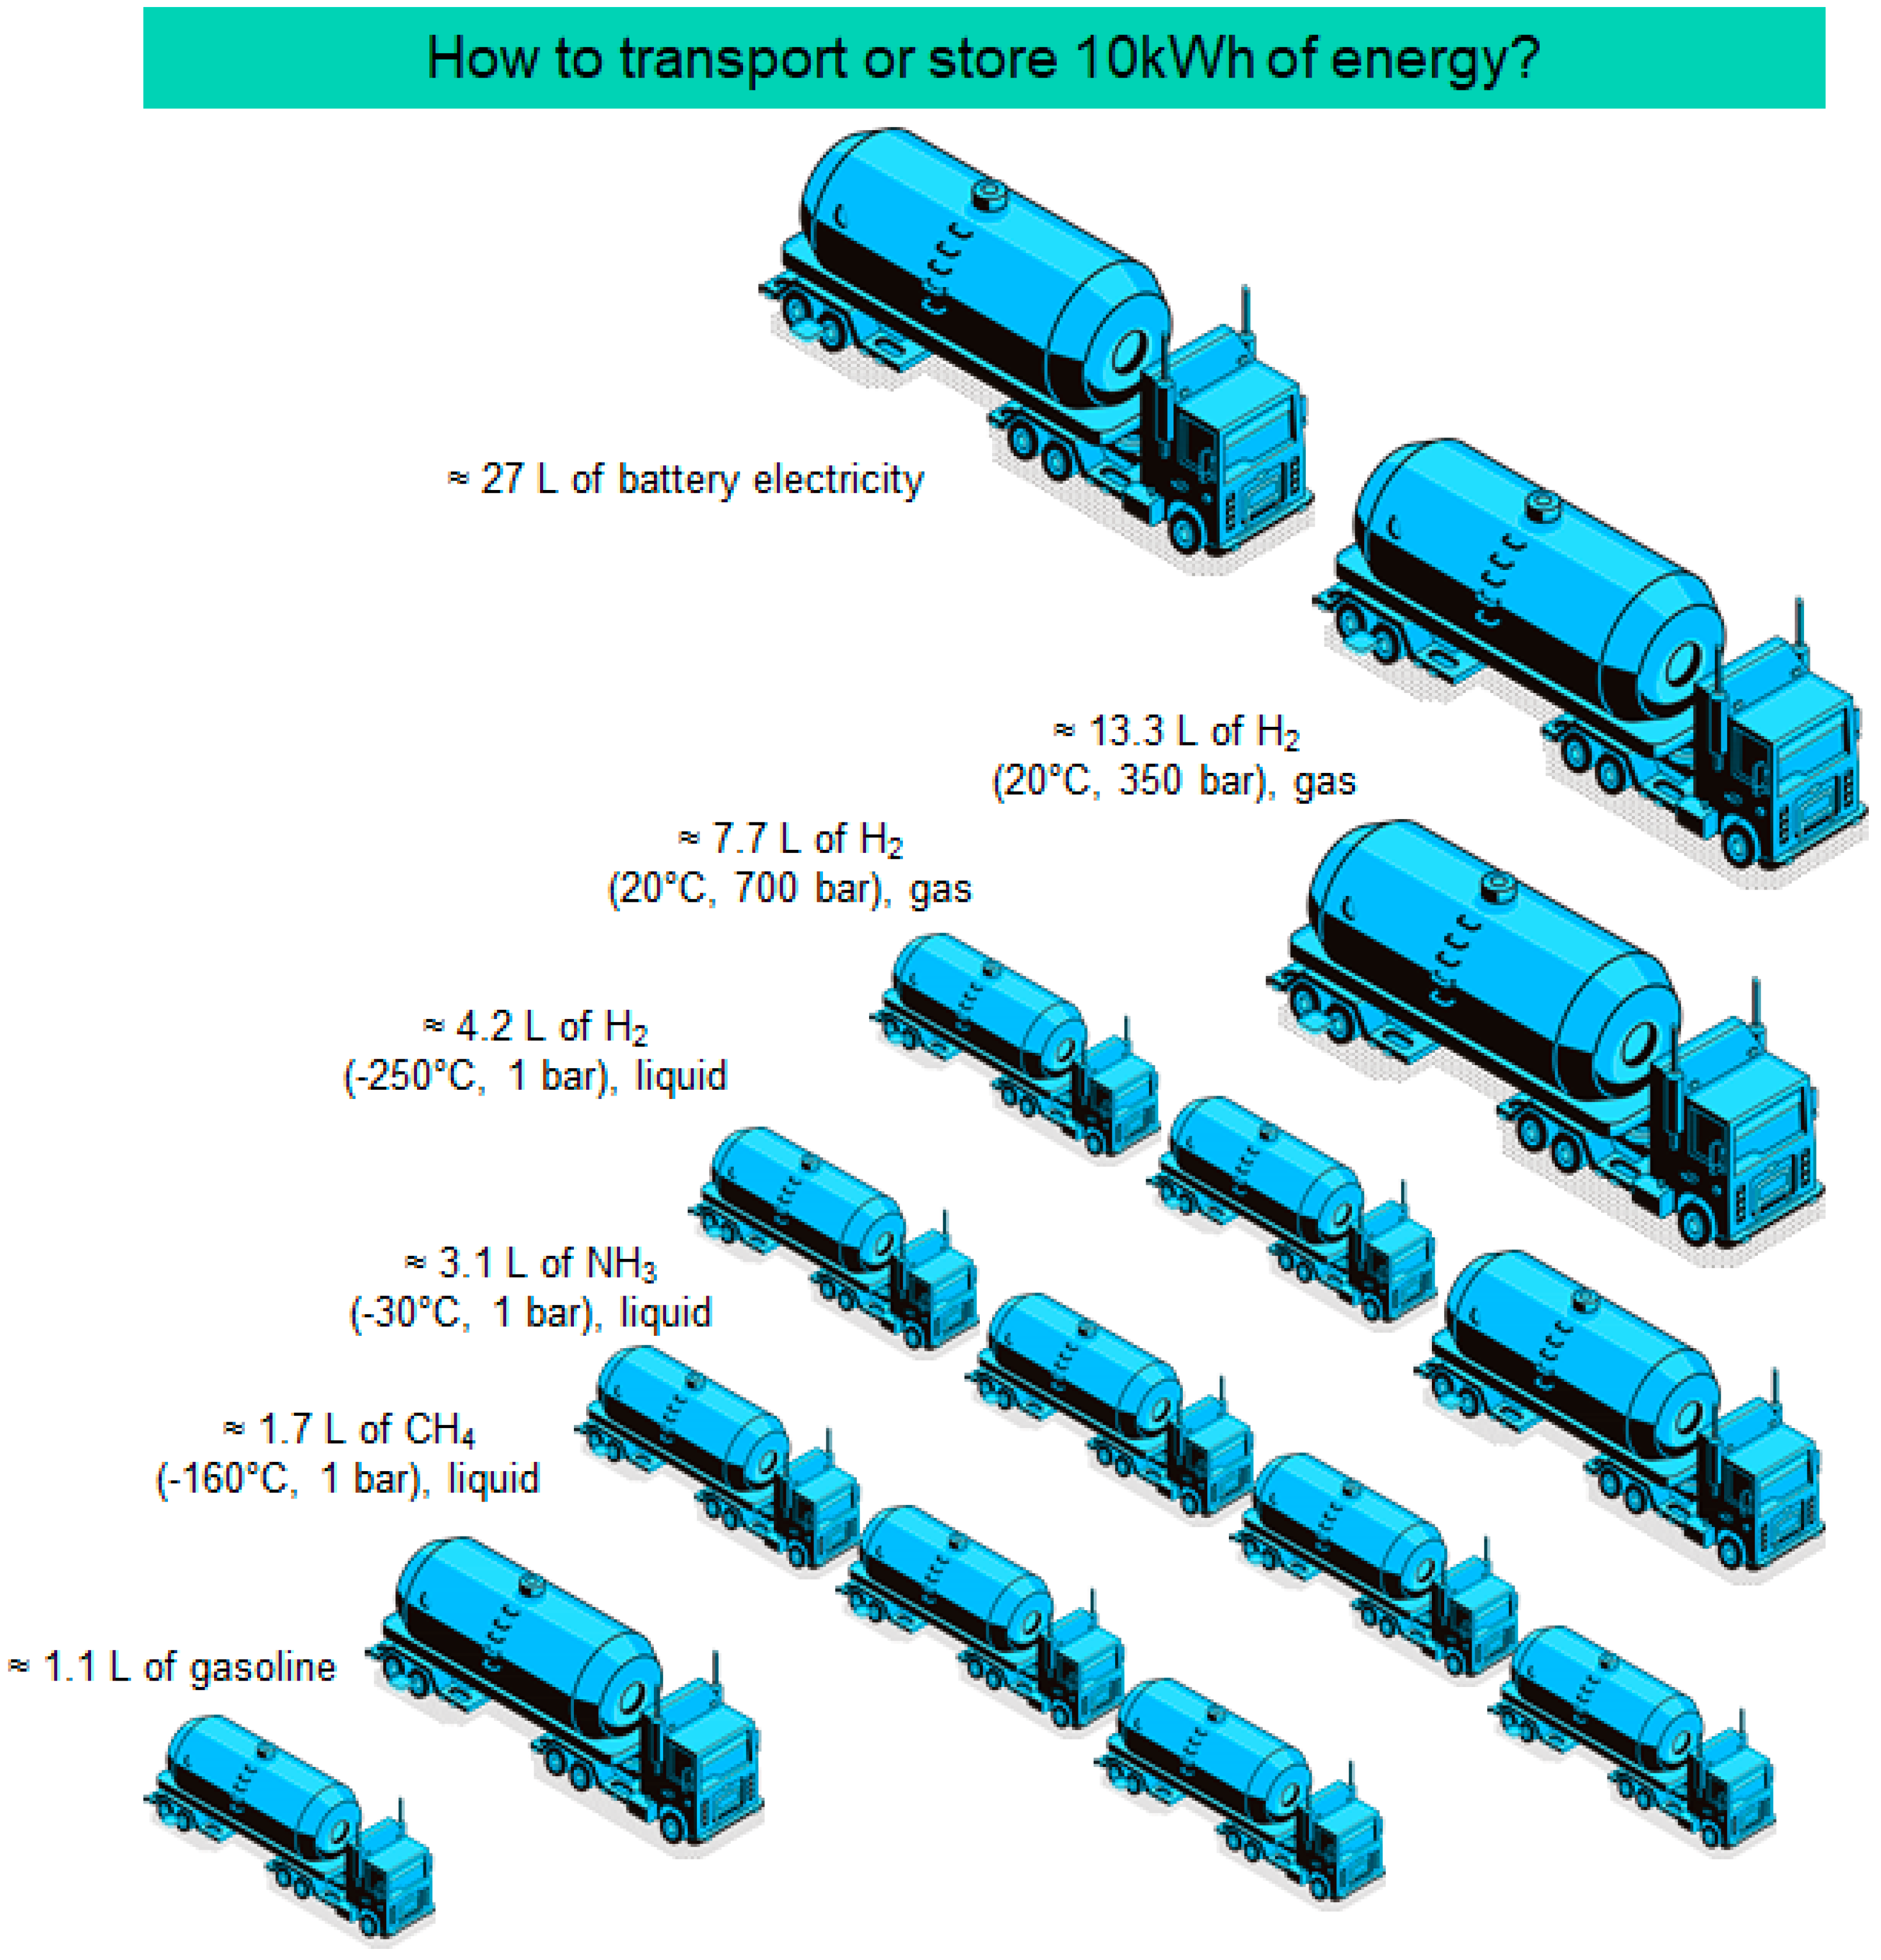 Image - How to transport or store 10kWh of energy?